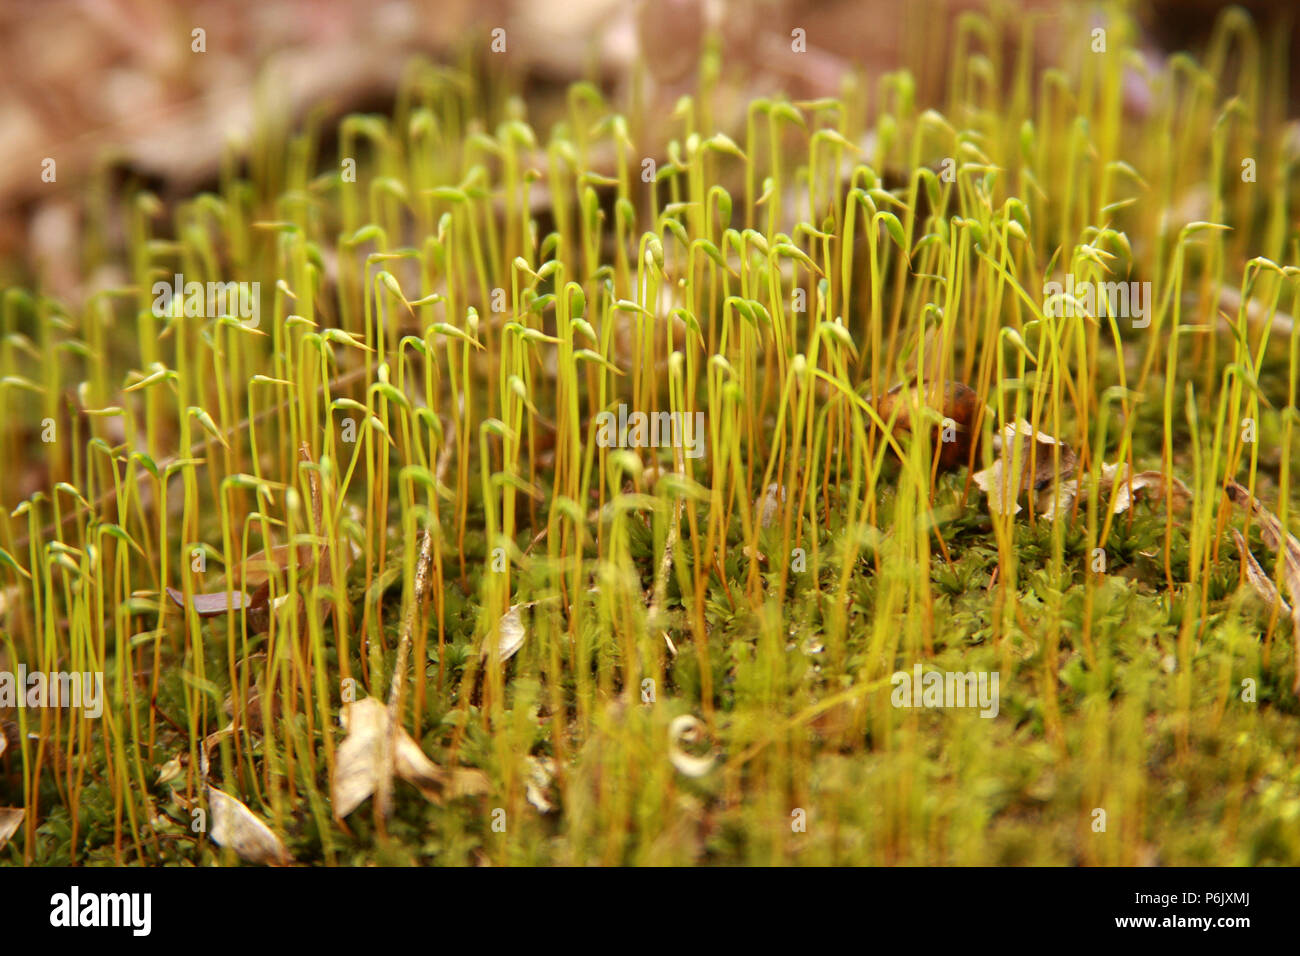 Patch of moss with spore capsules Stock Photo